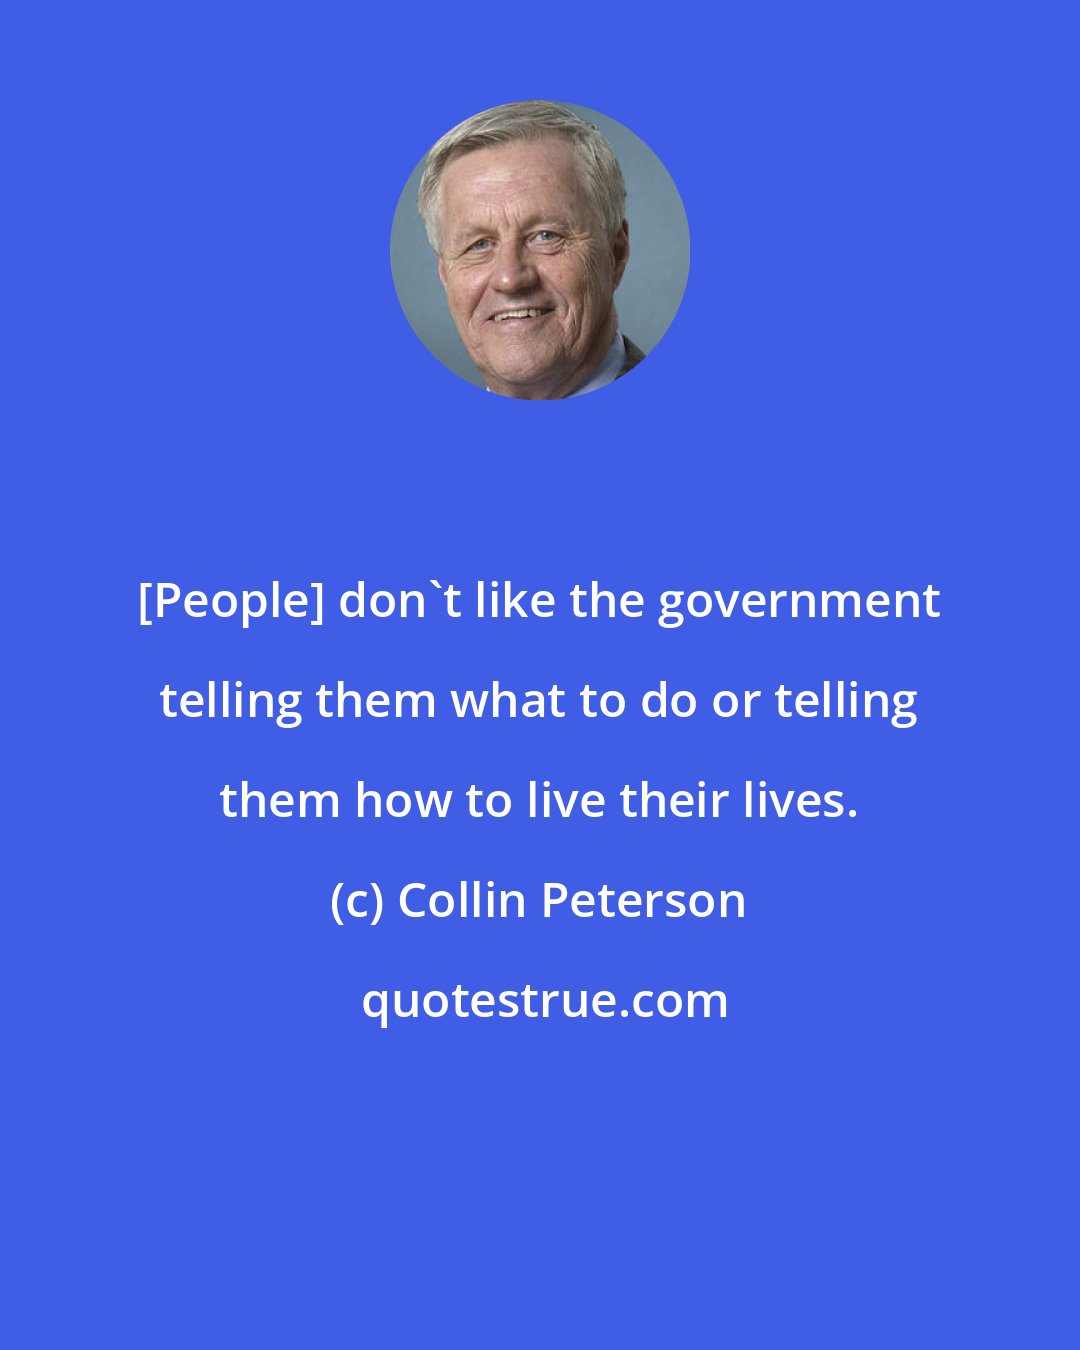 Collin Peterson: [People] don't like the government telling them what to do or telling them how to live their lives.